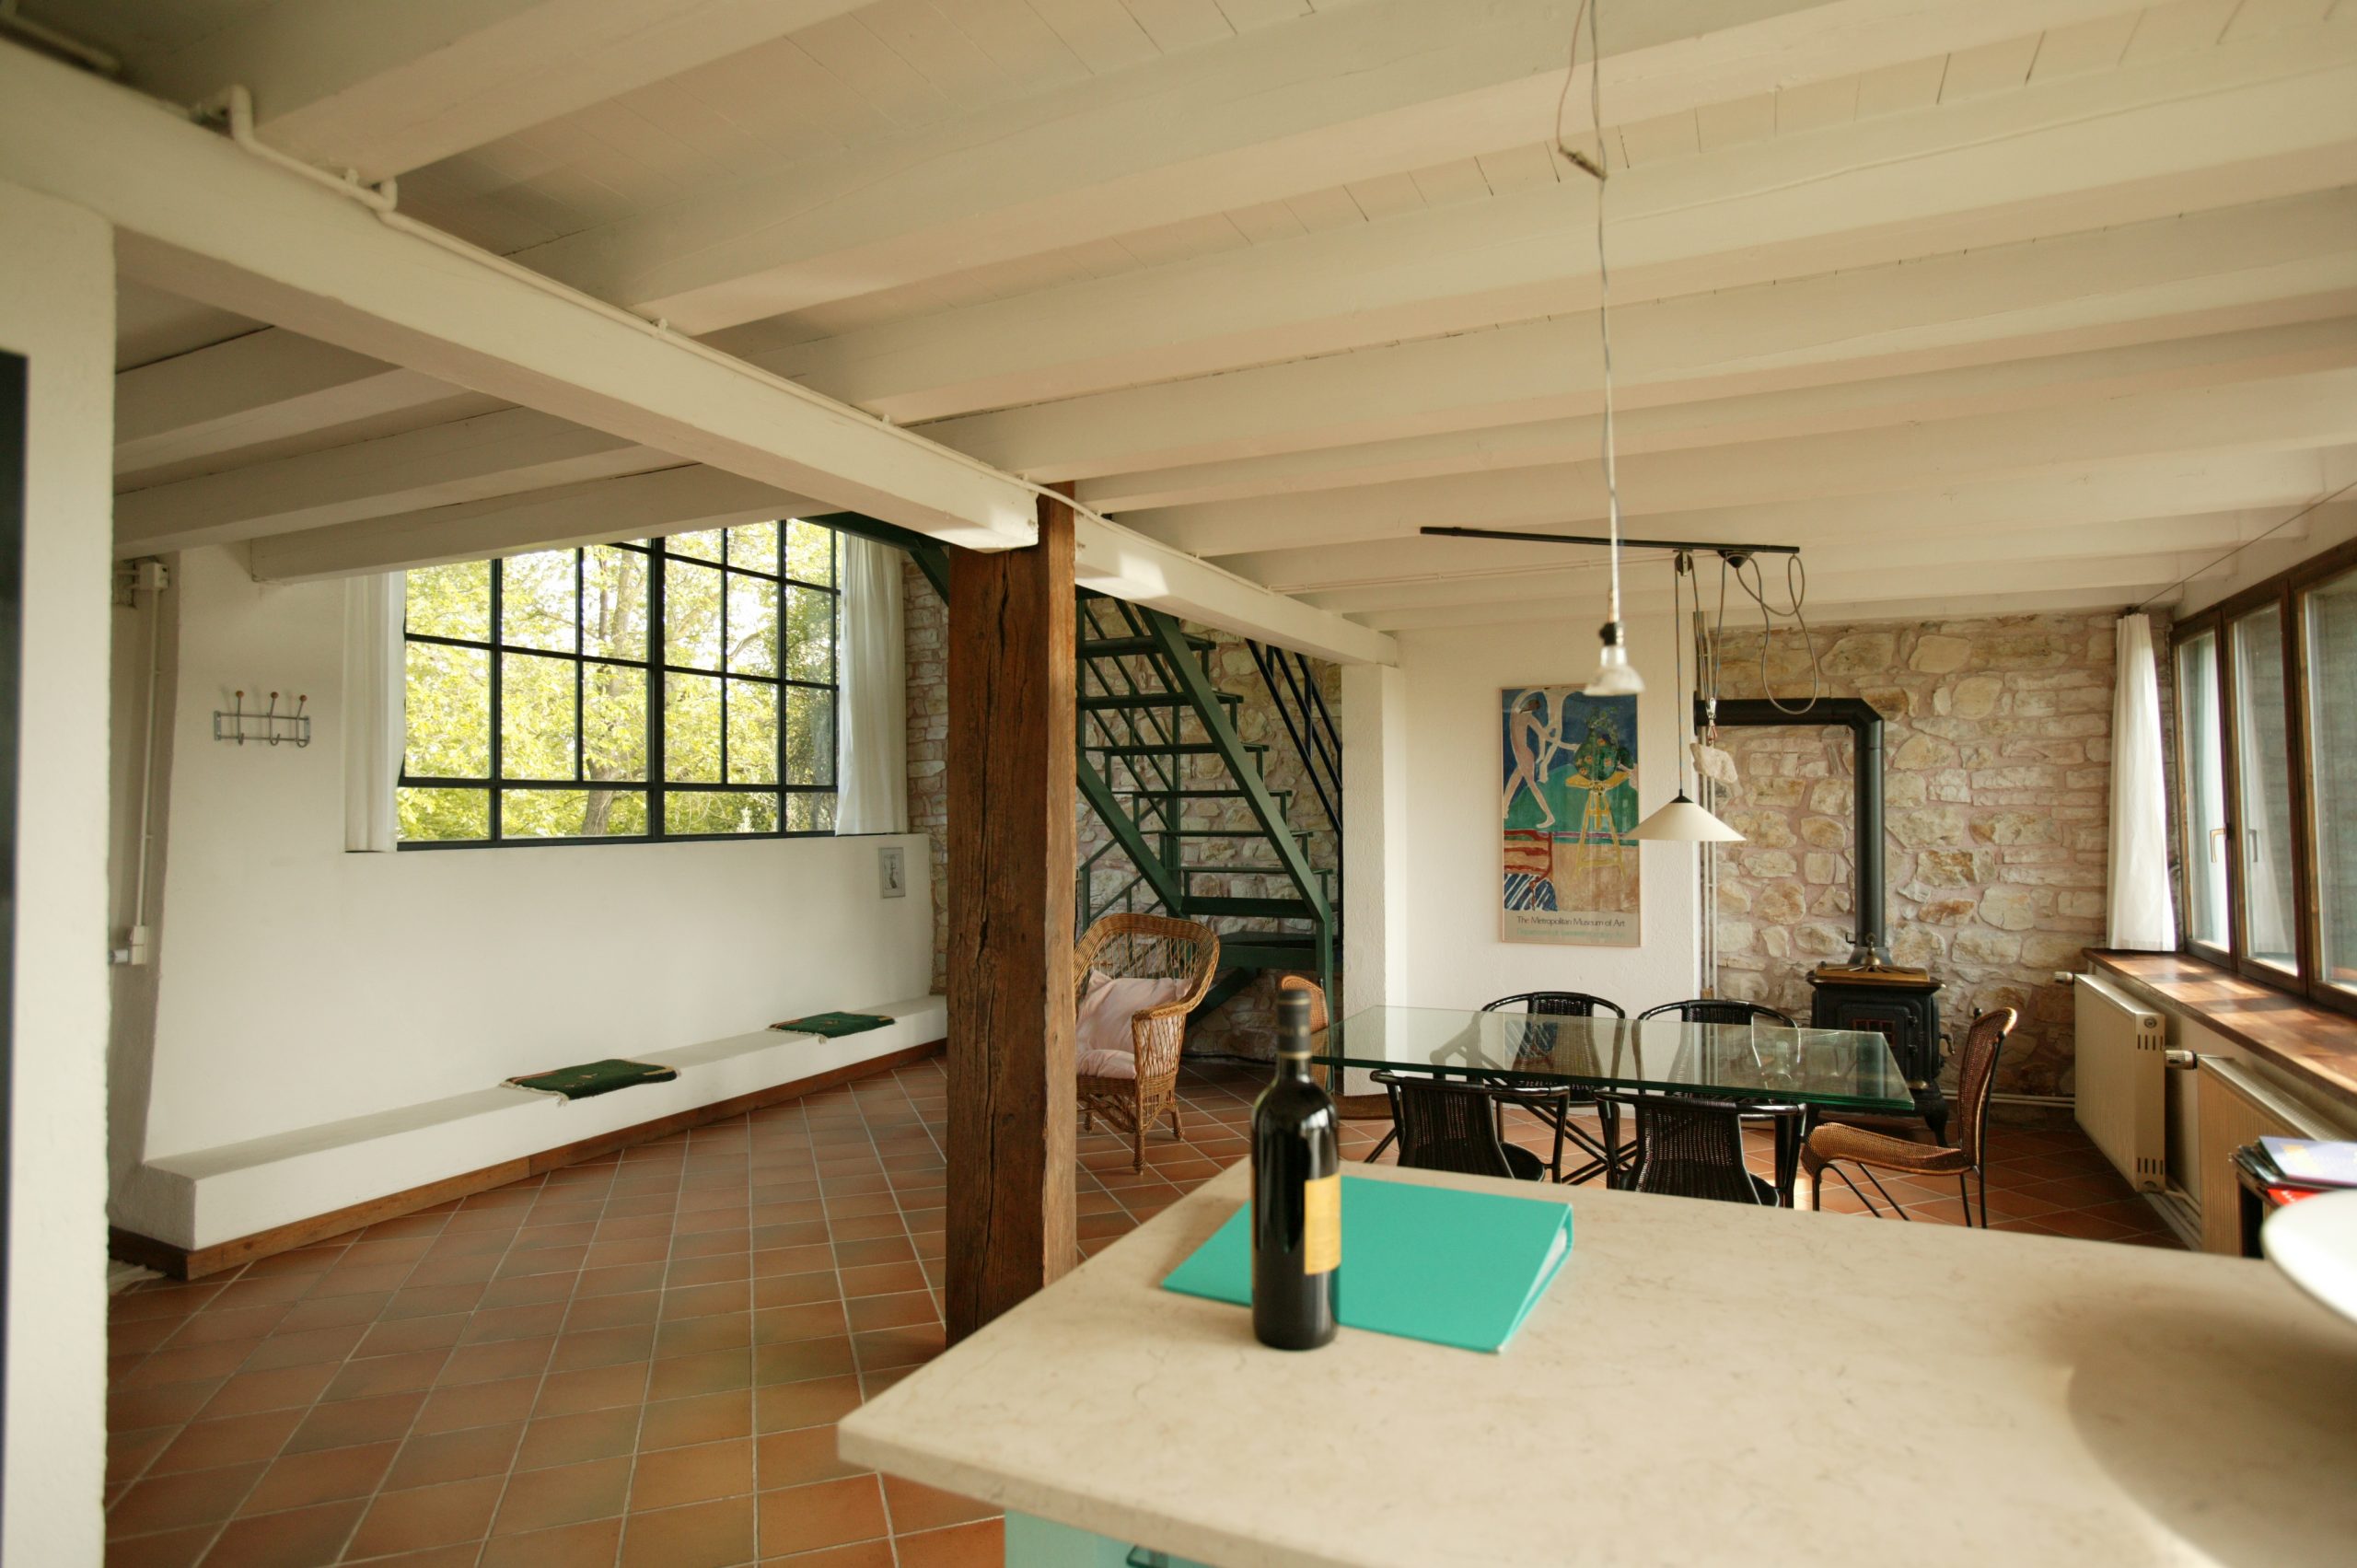 Annex with 2 apartments in Le Marche, Italy. Living room large apartment.